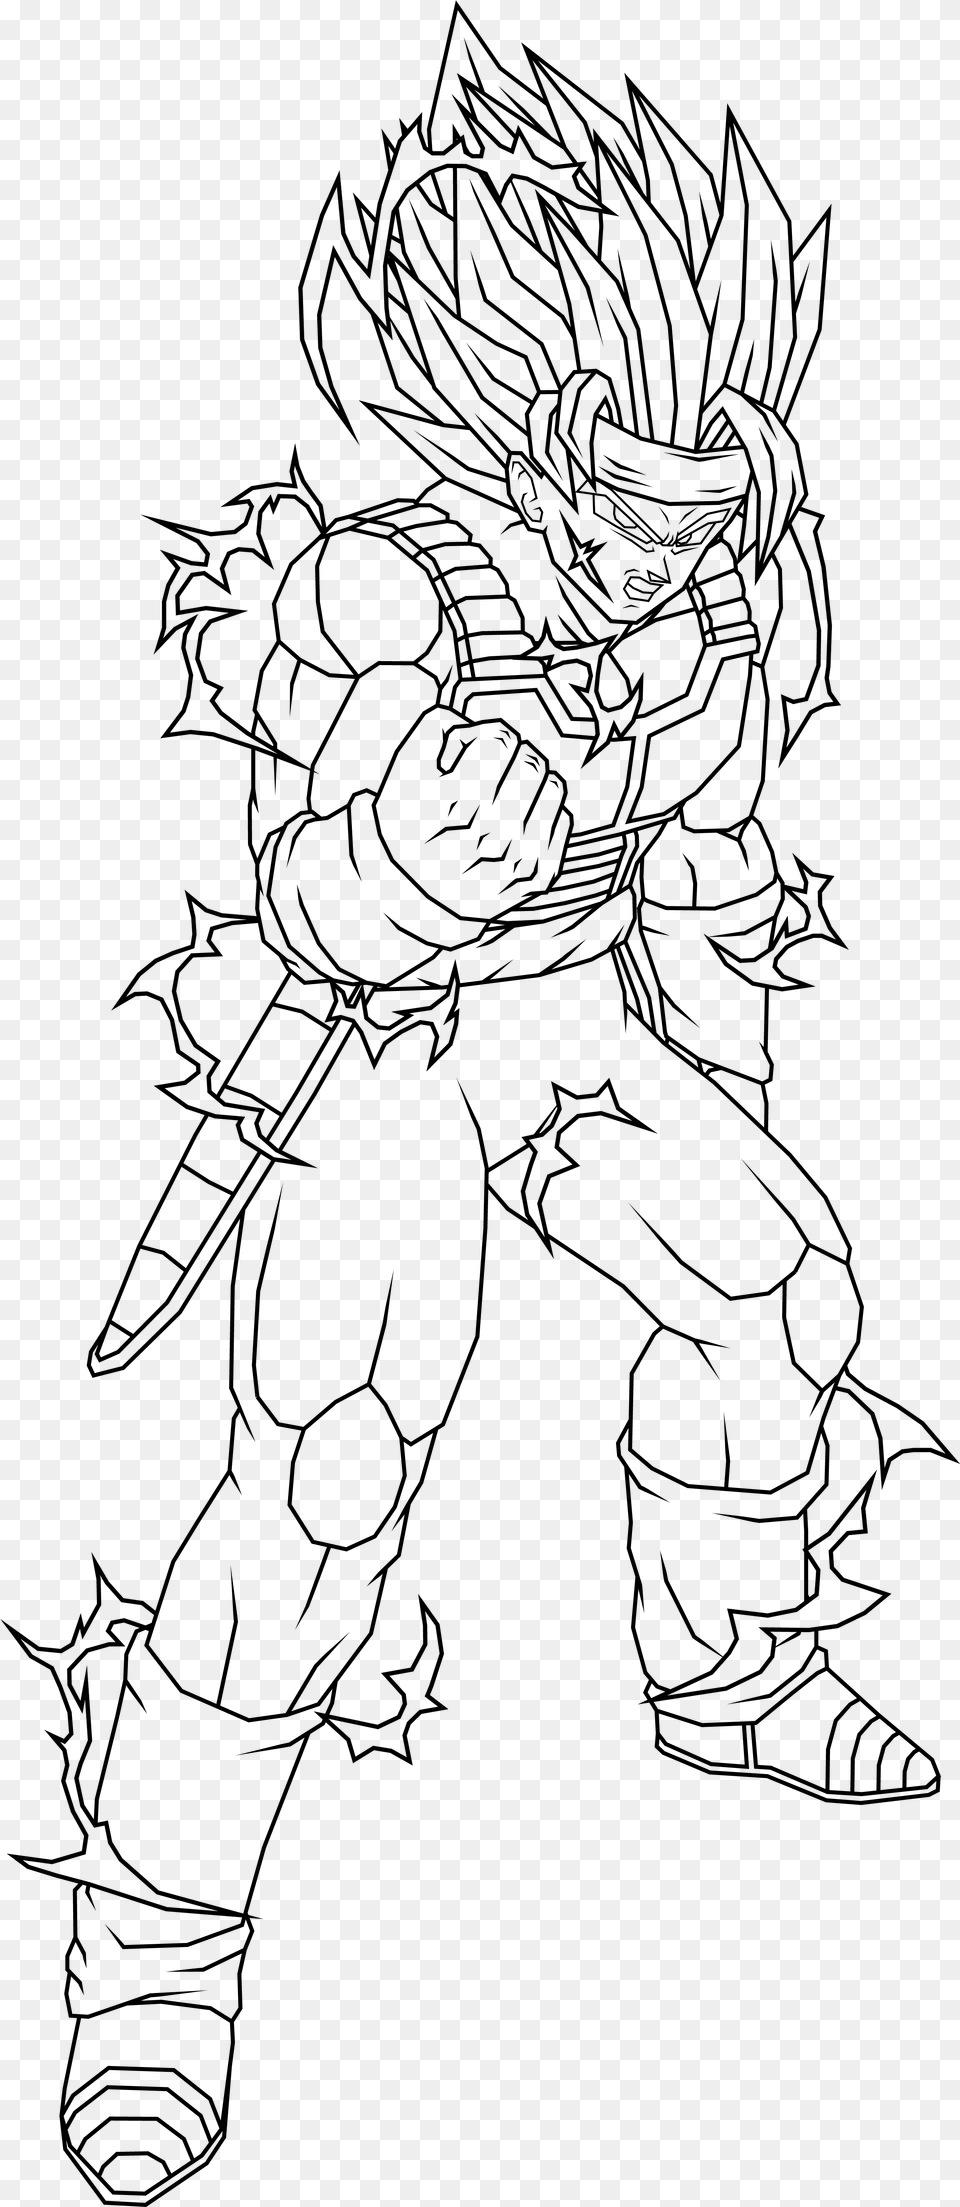 Bardock Coloring Pages 141 Dragon Ball Z Bardock Coloring Pages, Gray Png Image